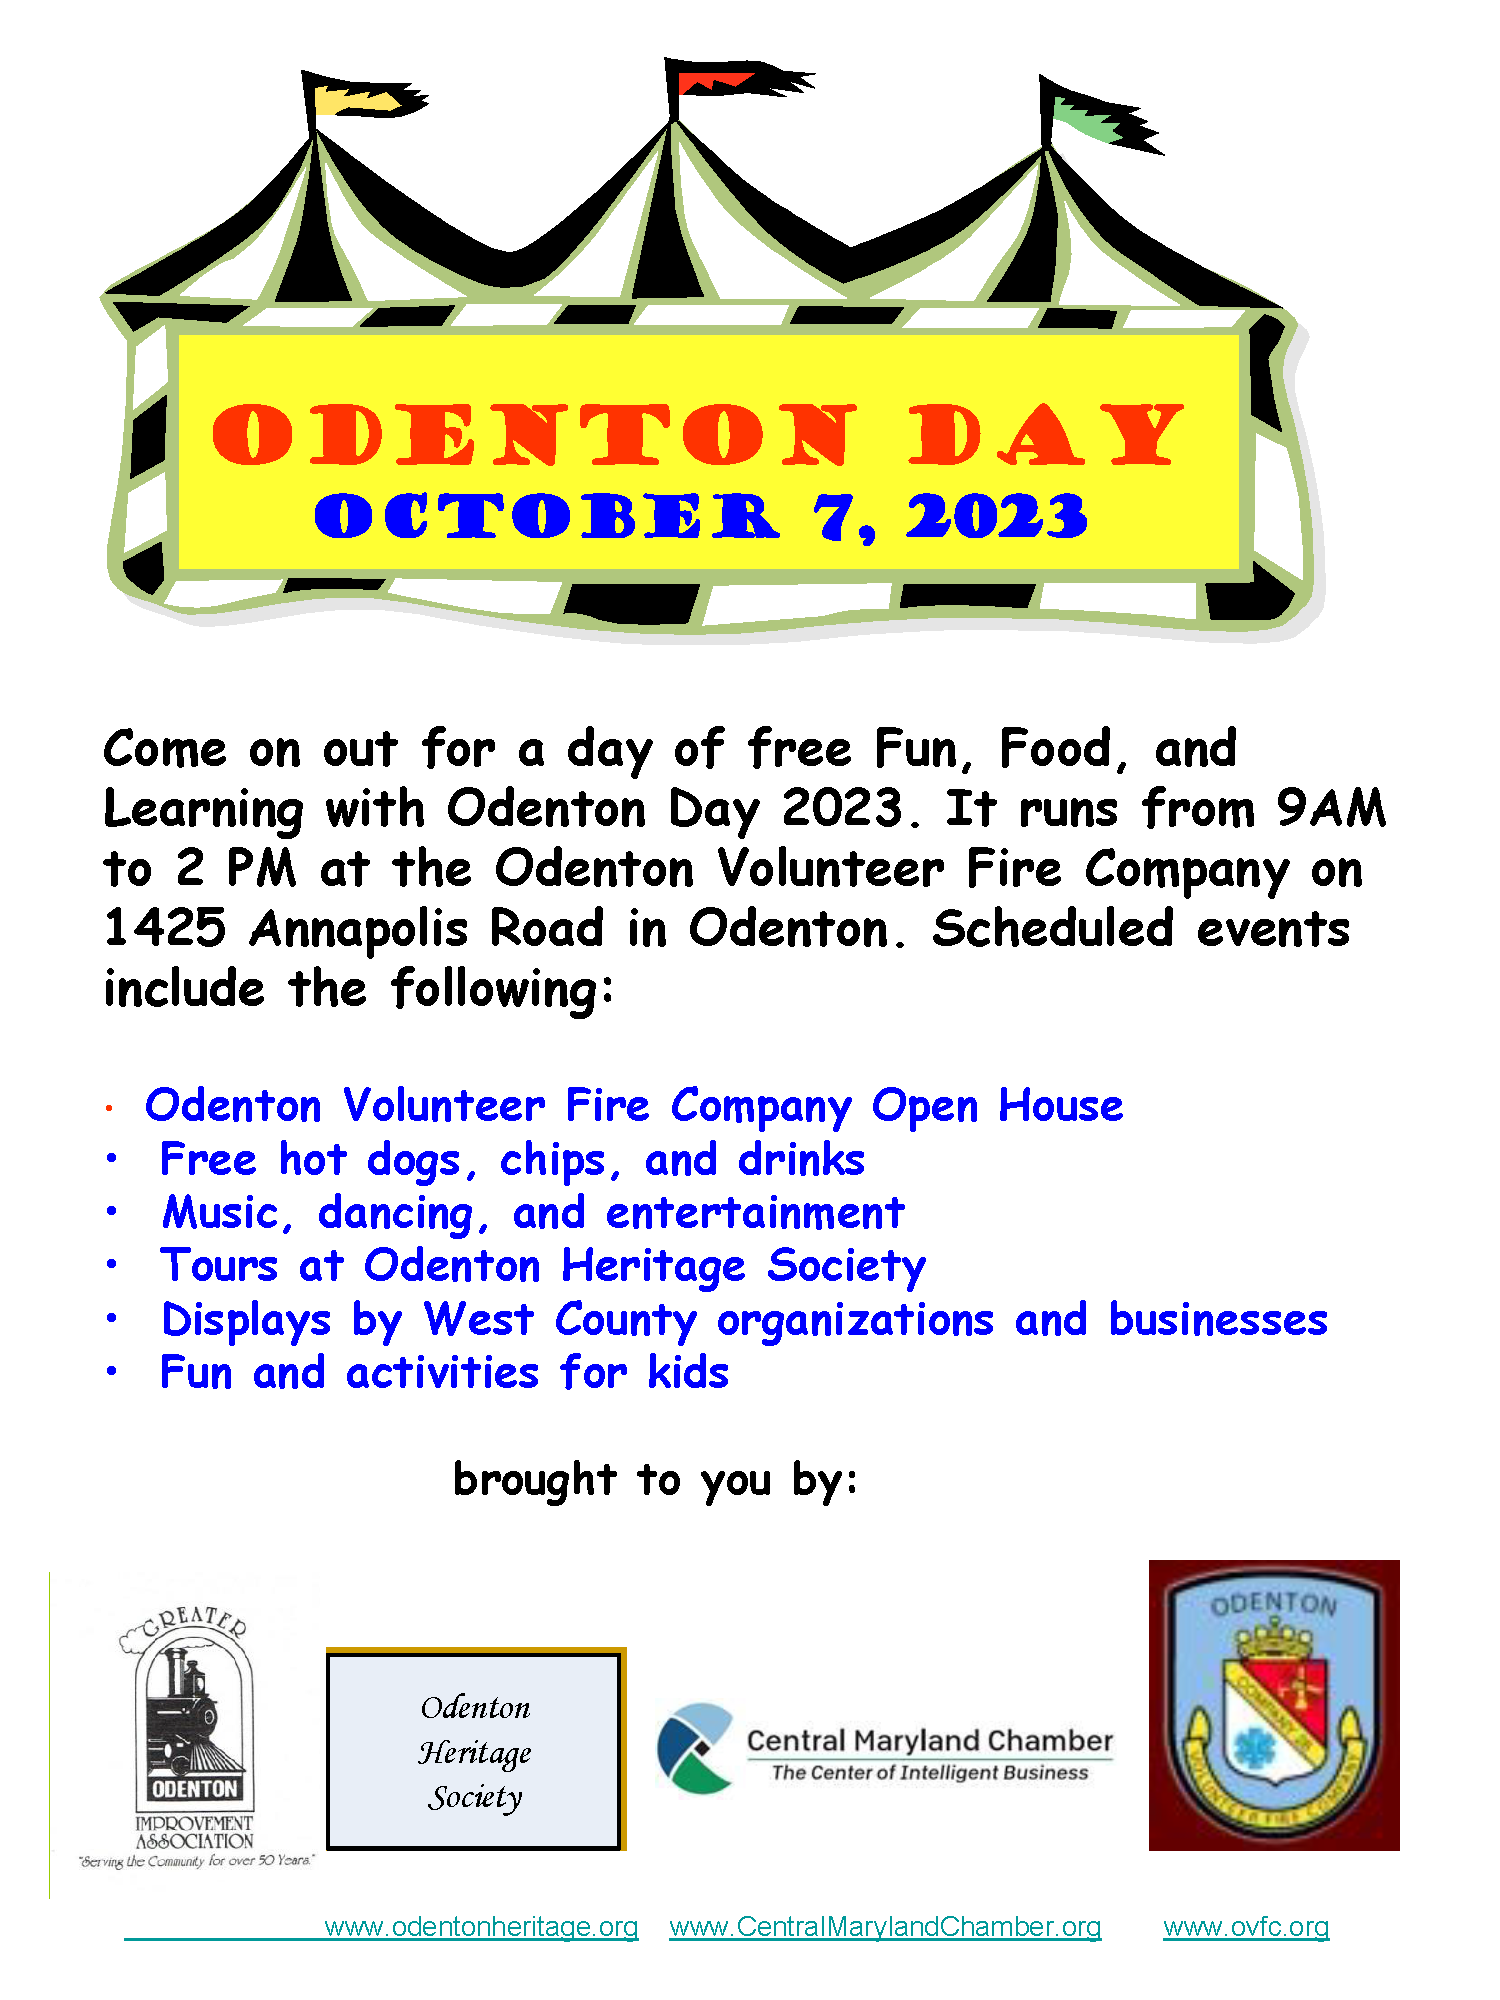 Odenton Day Poster 2023